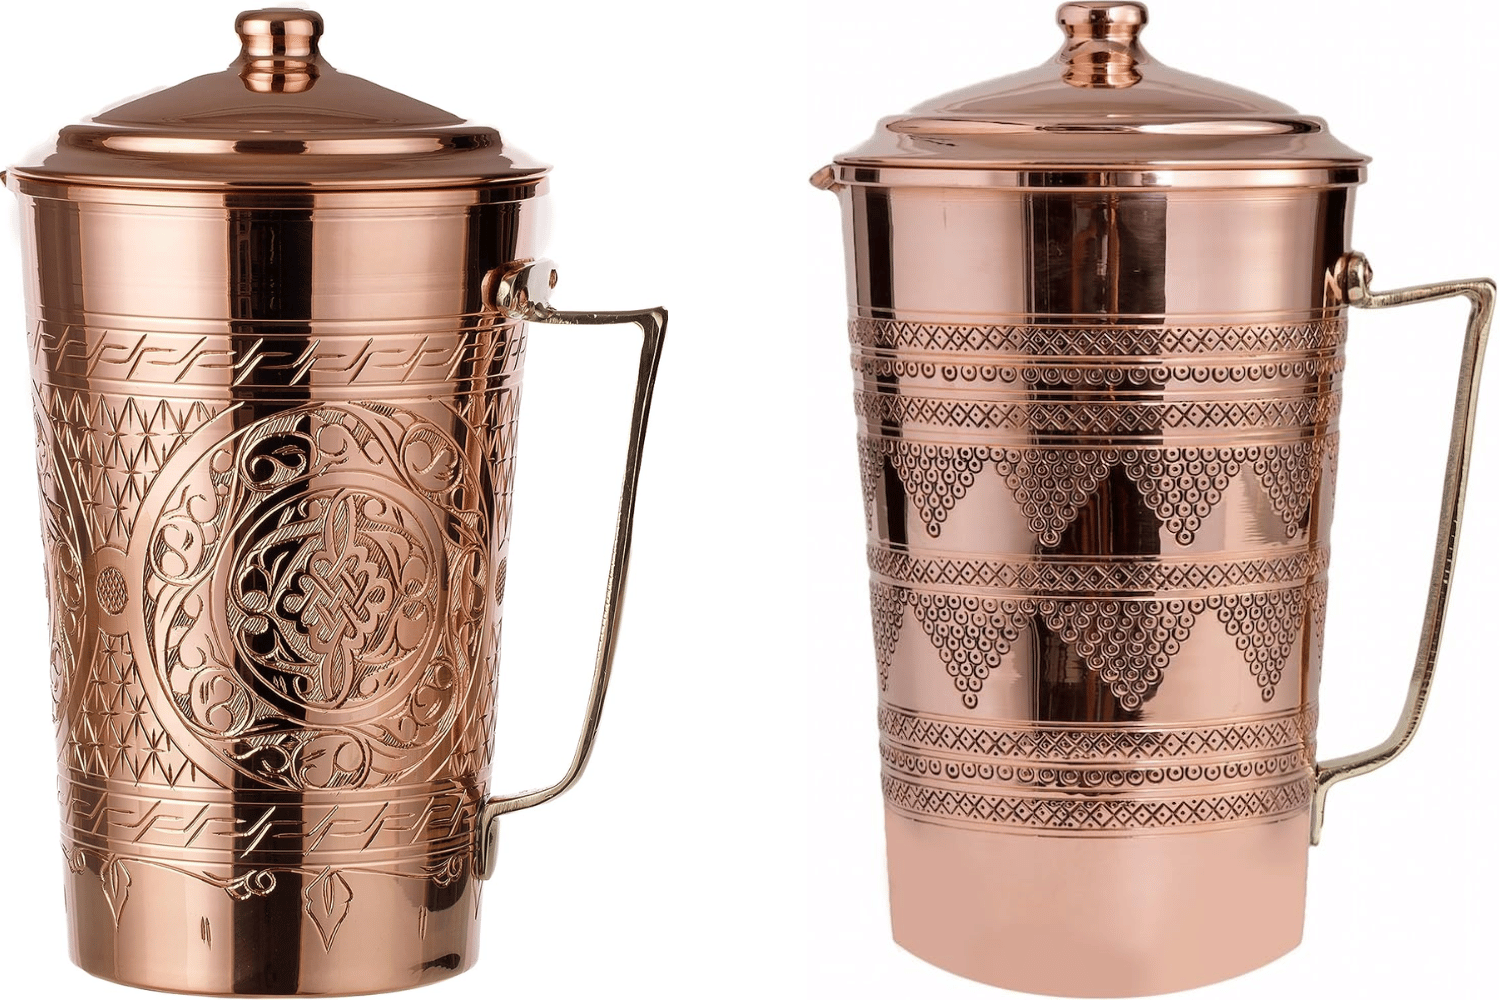 Copper Water Pitcher - style and elegance for your kitchen or lounge.